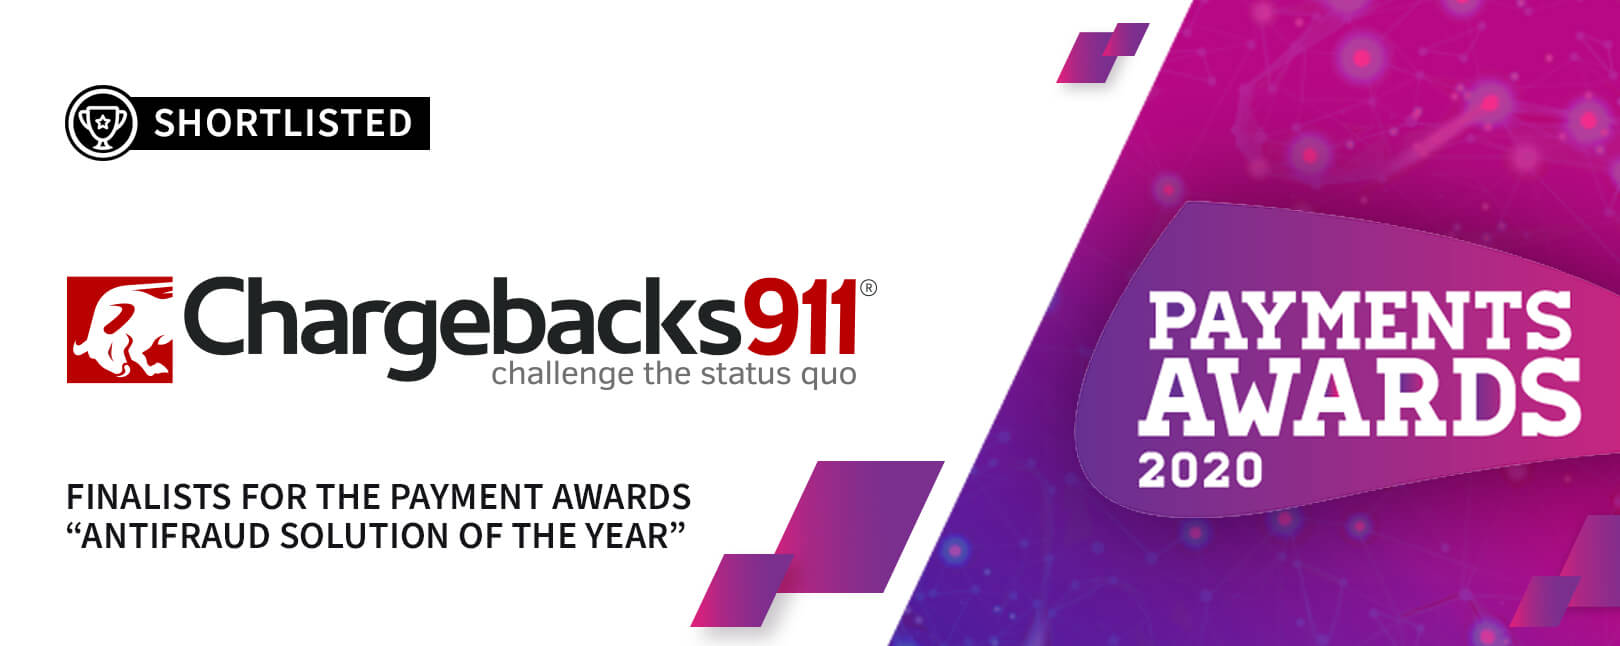 Chargebacsk911® Selected for “Antifraud Solution of the Year” Award!